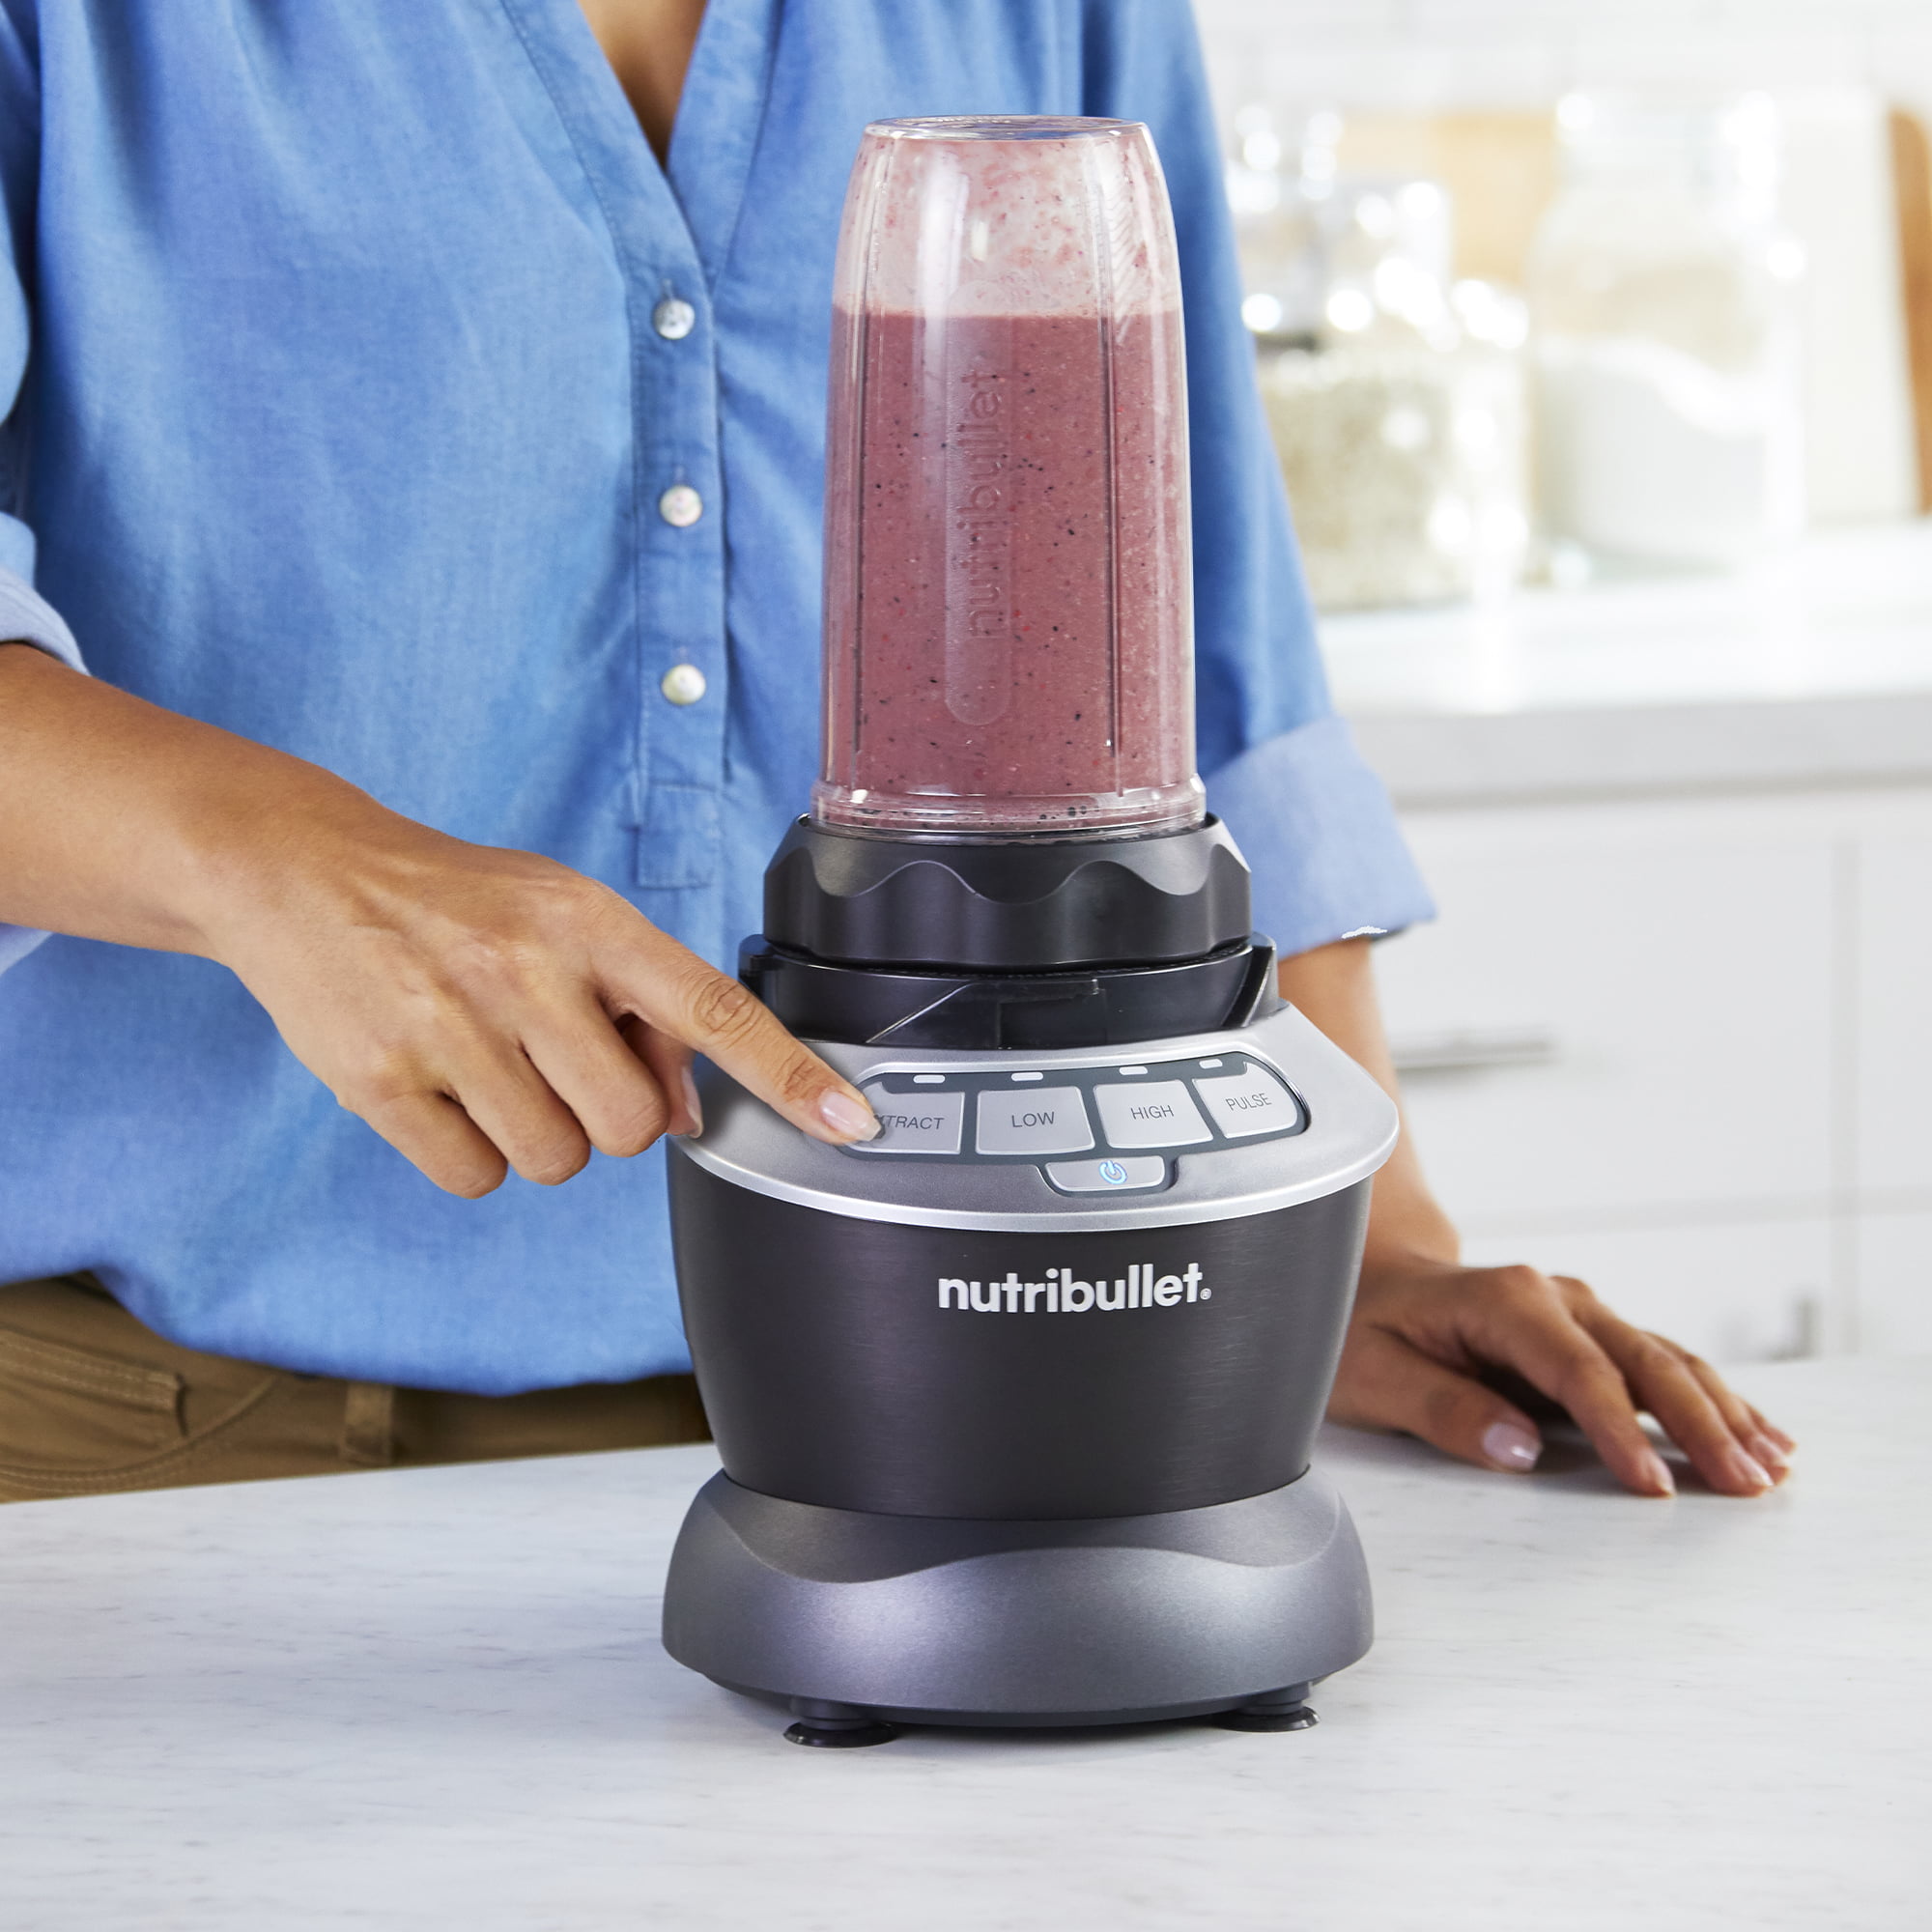 Ganiza 900W Blender for Shakes and Smoothies, 15-in-1 Blender Combo